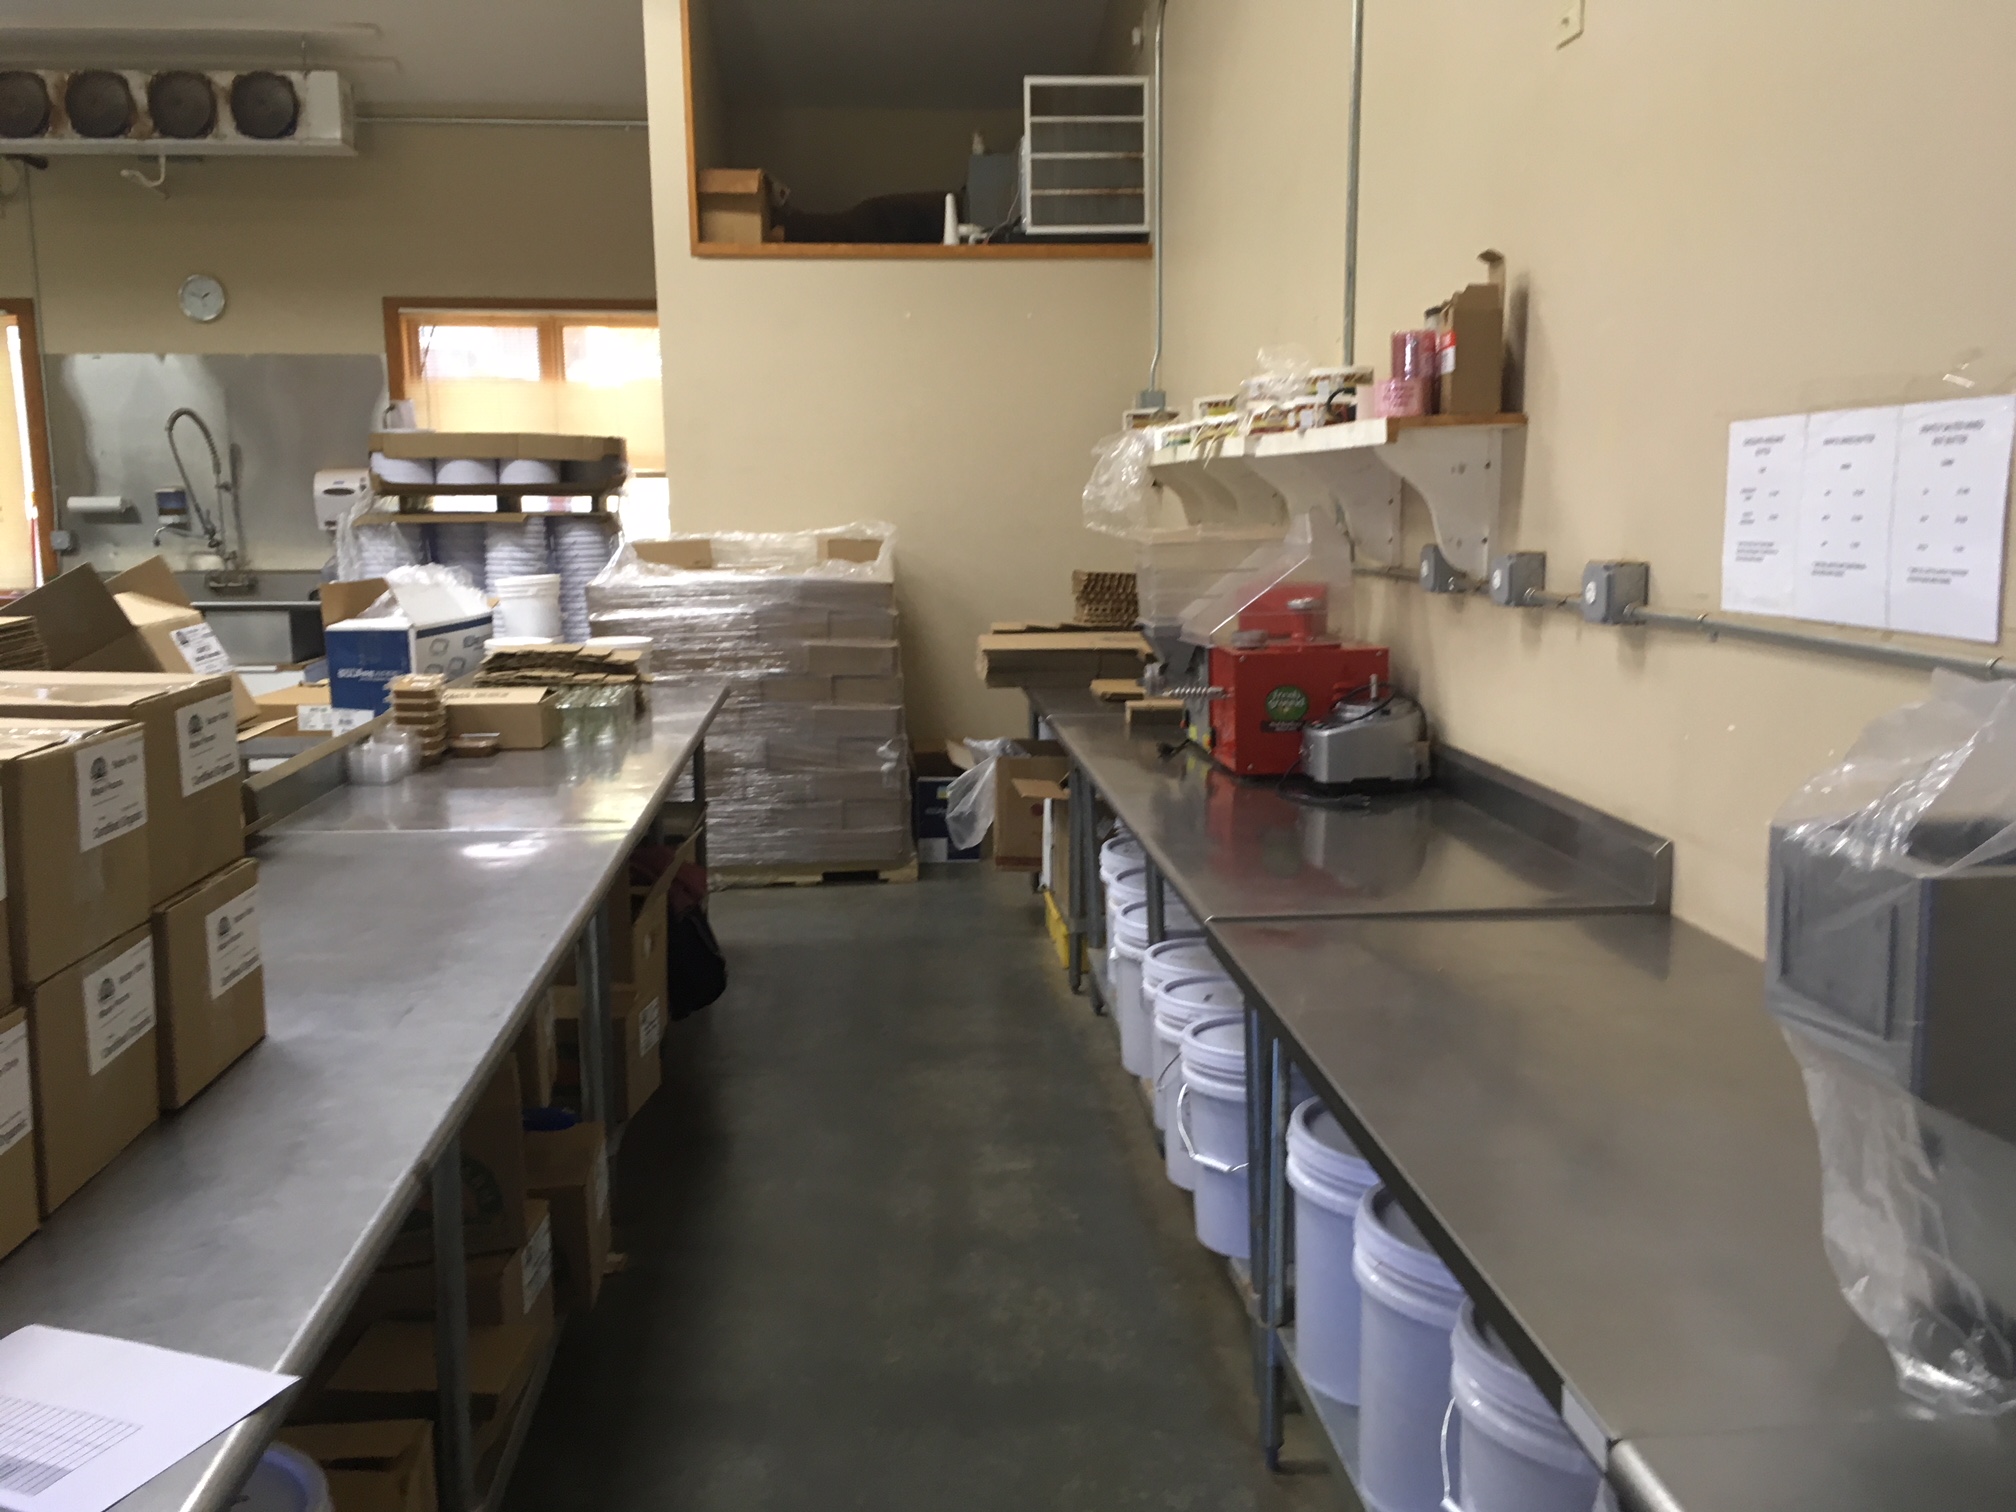 Nut butter processing and packing station